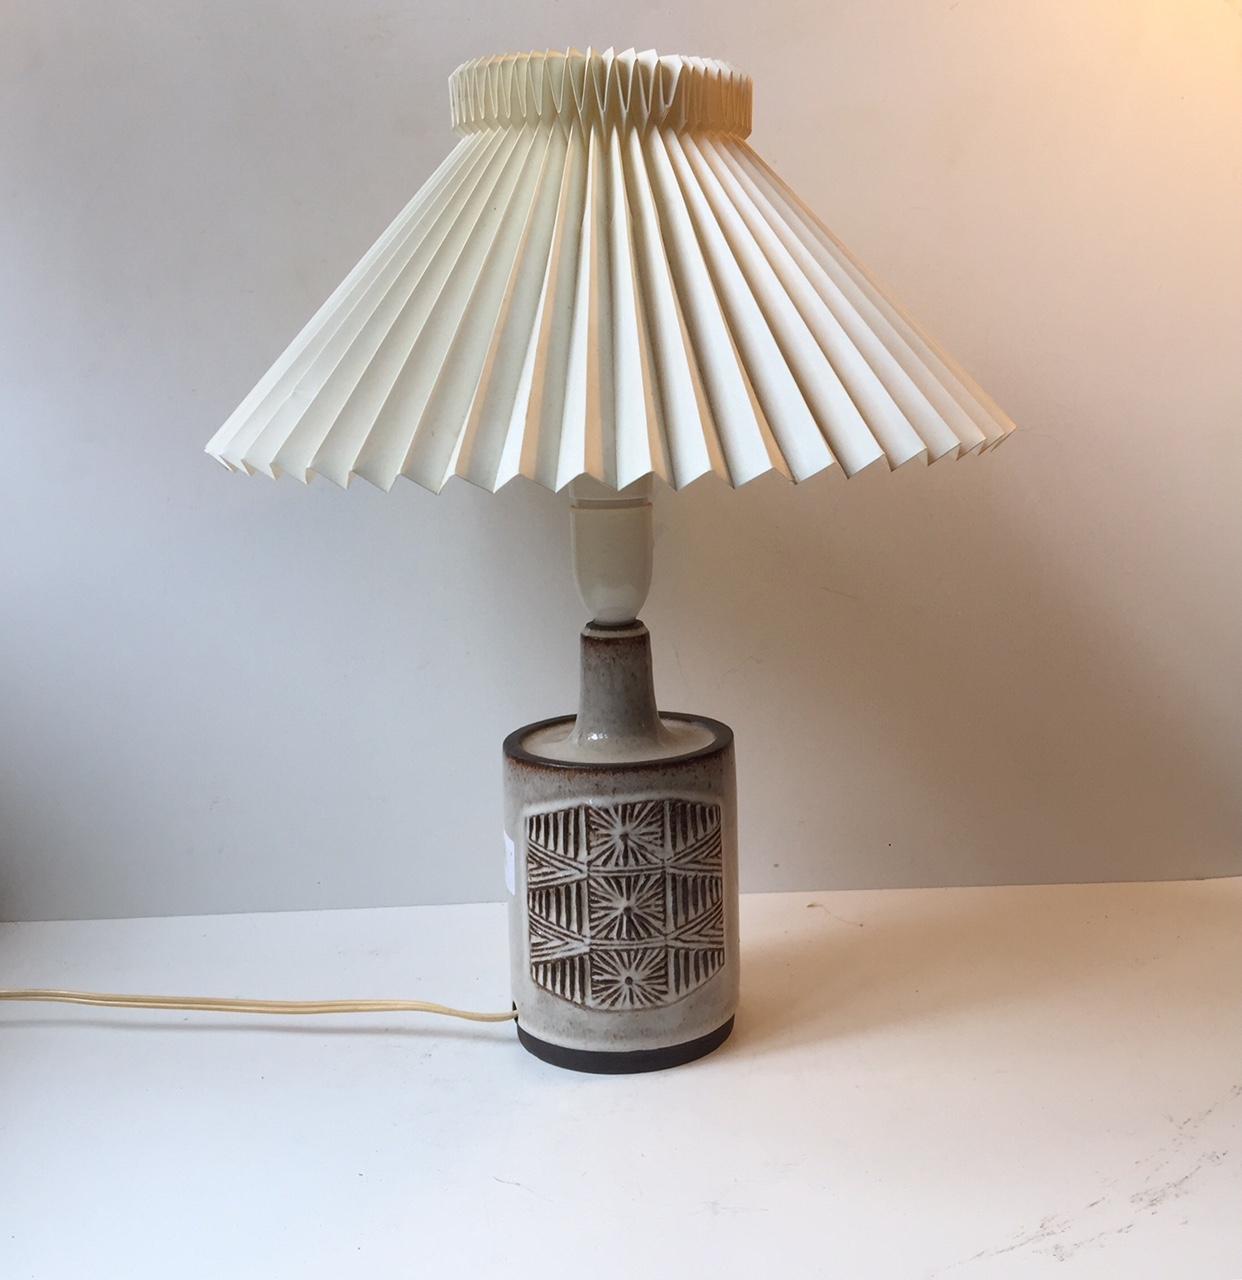 Vintage Danish Stogo stoneware table lamp with sunburst center motif. It was designed by ceramist H. Gottschalk-Olsen in the 1970s and manufactured at Stogo Studio. Stamped with both maker marks and designer initials to the base. The table lamp is